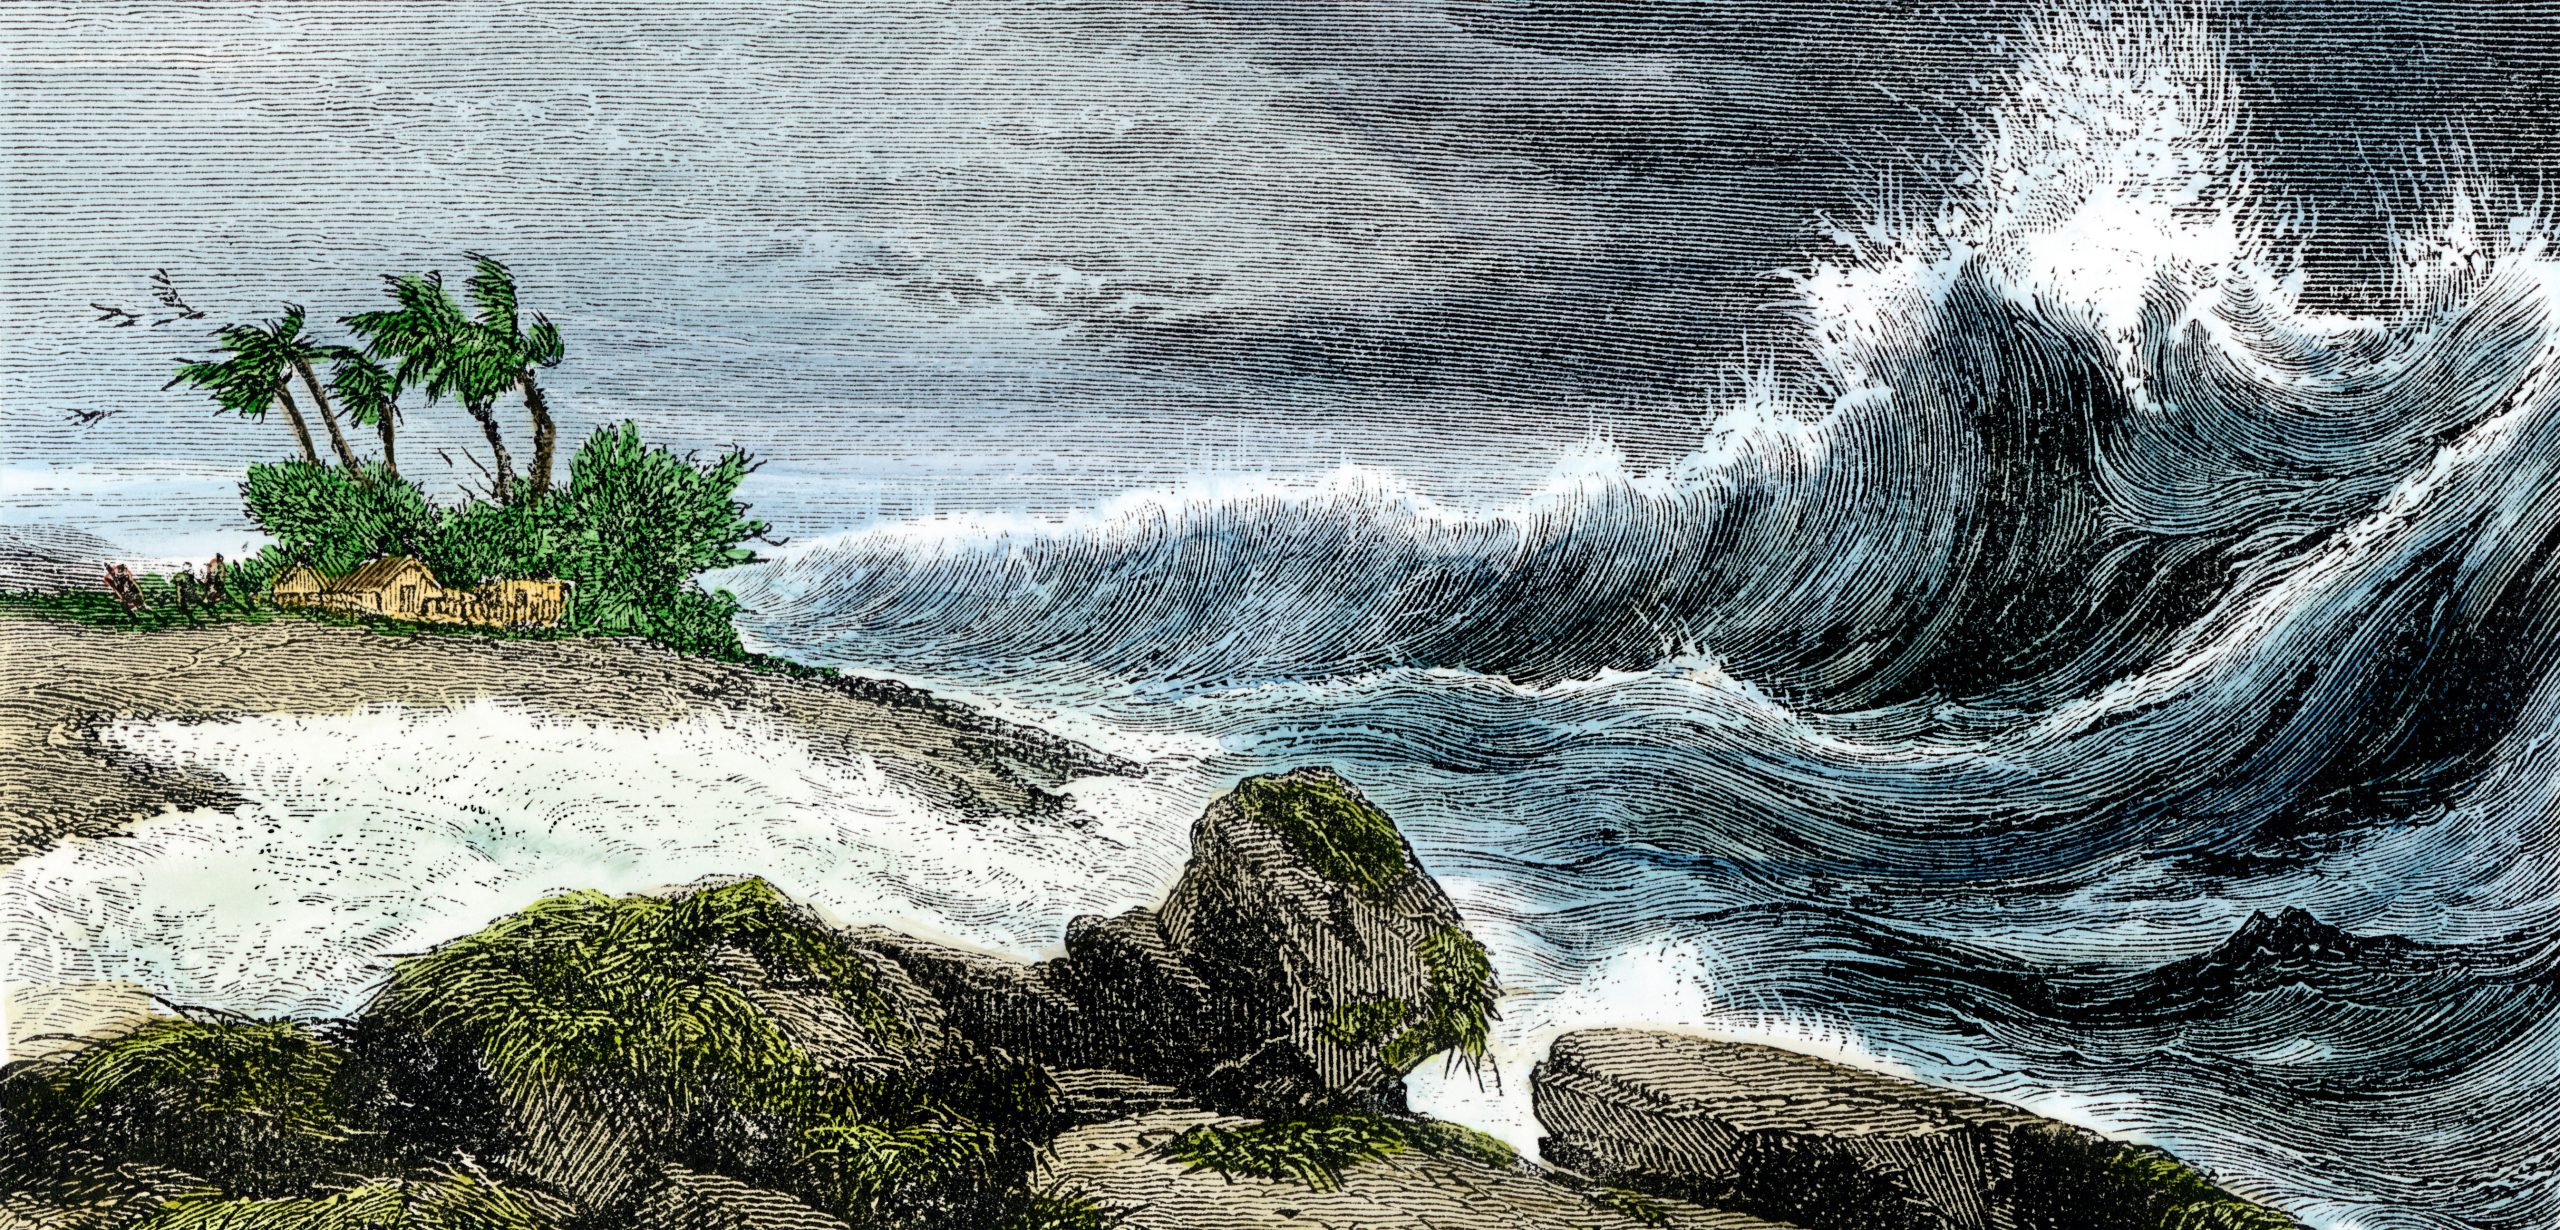 People on North America’s east coast don’t often worry about tsunamis, but instabilities in the Atlantic seafloor have set them off before—and could again. Photo by North Wind Picture Archives/Alamy Stock Photo